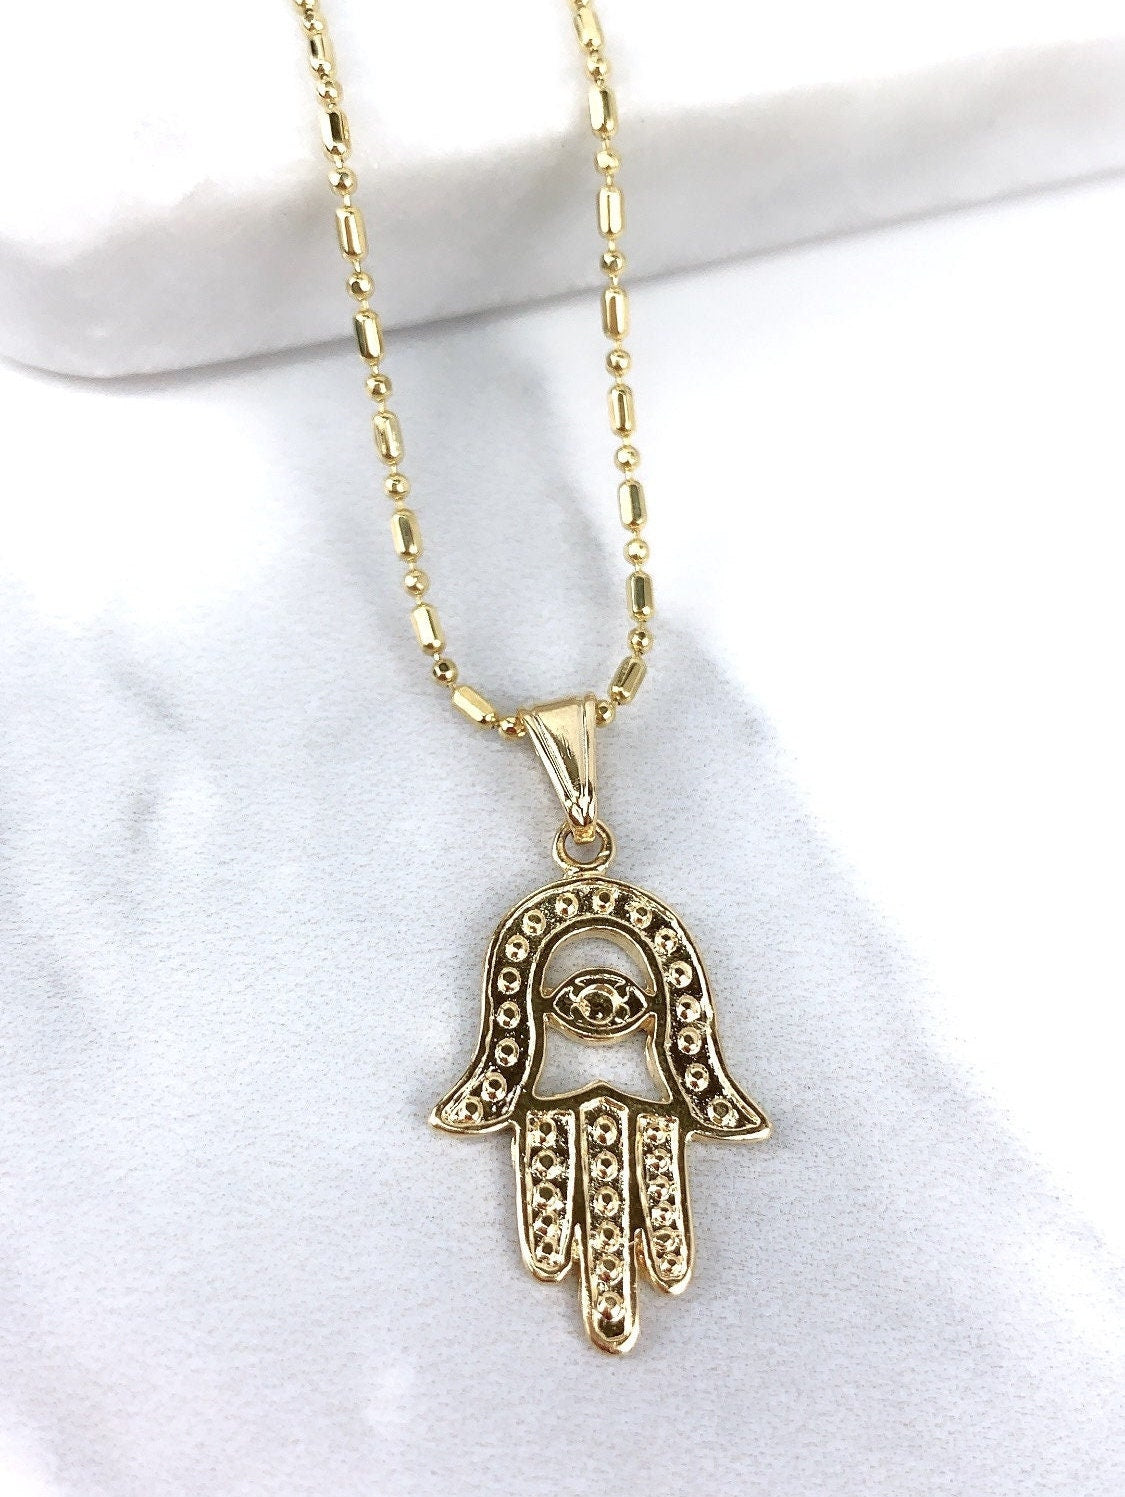 18k Gold Filled Texturized Cutout Hamsa Hand, Hand of God Shape Design Pendant Charms, Lucky Protection, Wholesale Jewelry Making Supplies